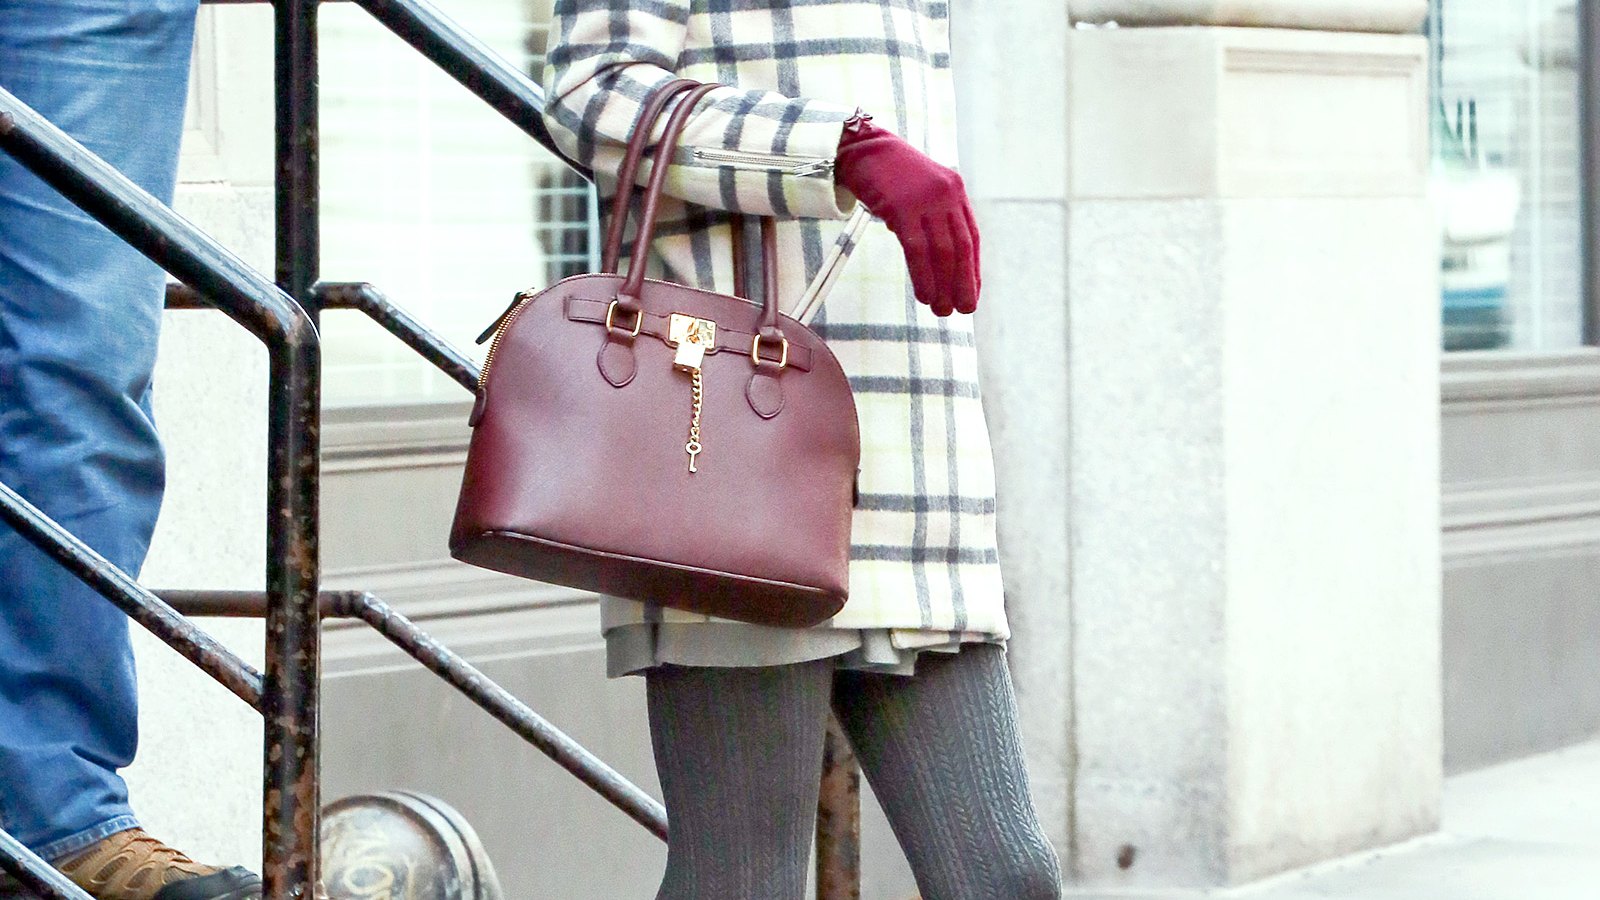 Taylor Swift is seen on December 19, 2014 in NYC.